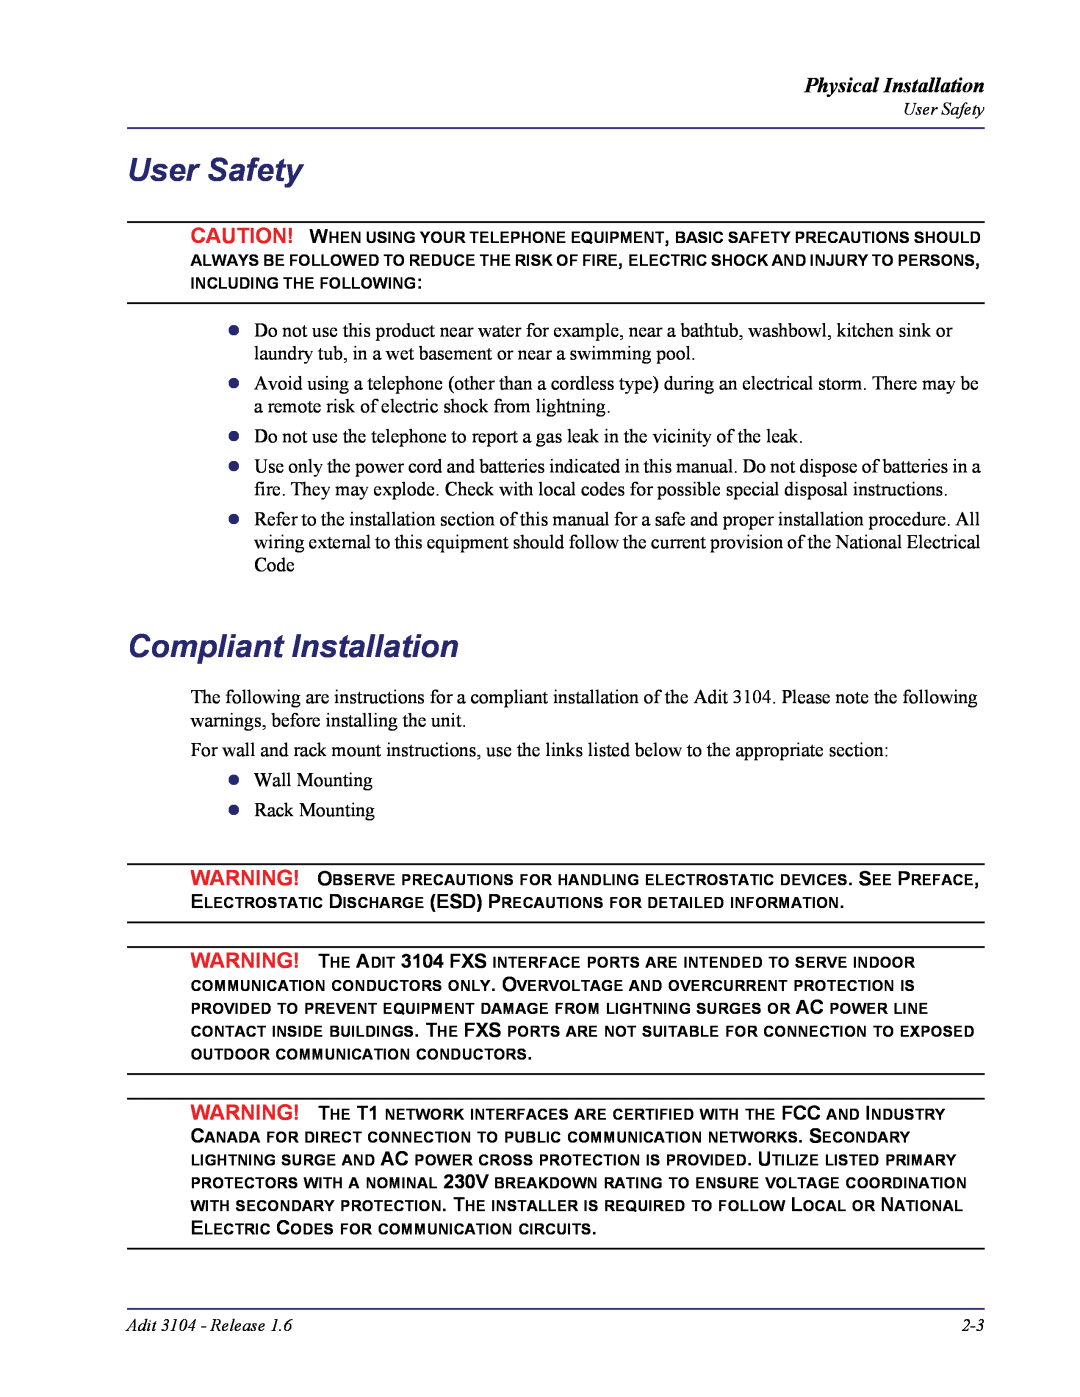 Carrier Access Adit 3104 user manual User Safety, Compliant Installation, Physical Installation 